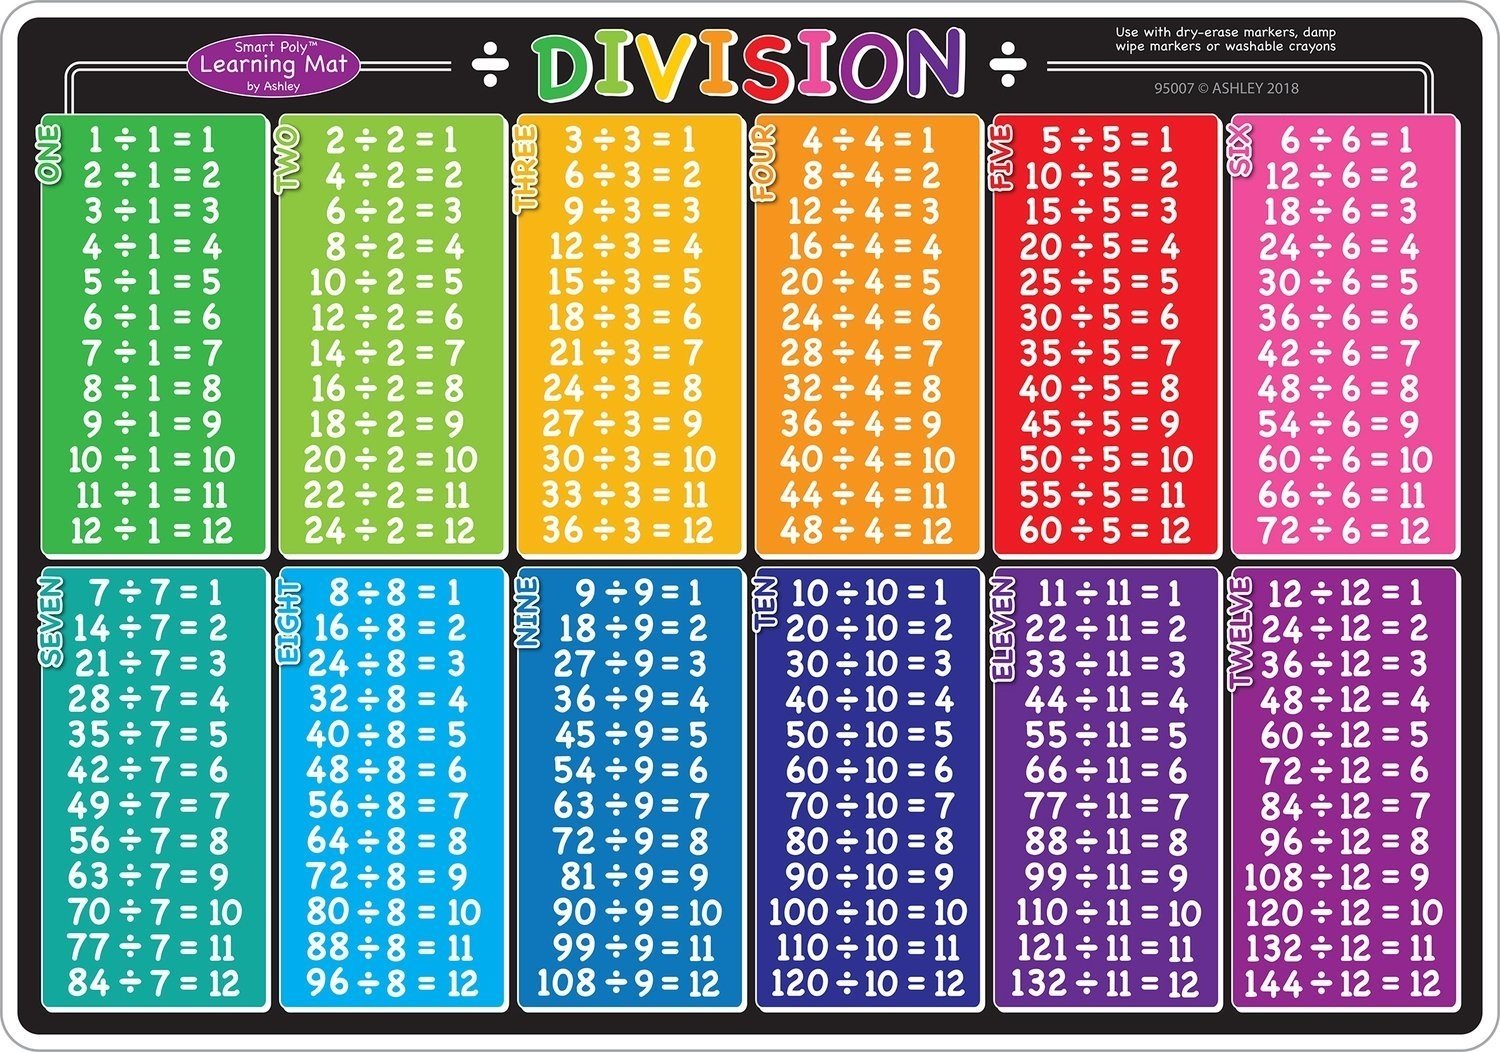 division-chart-to-100